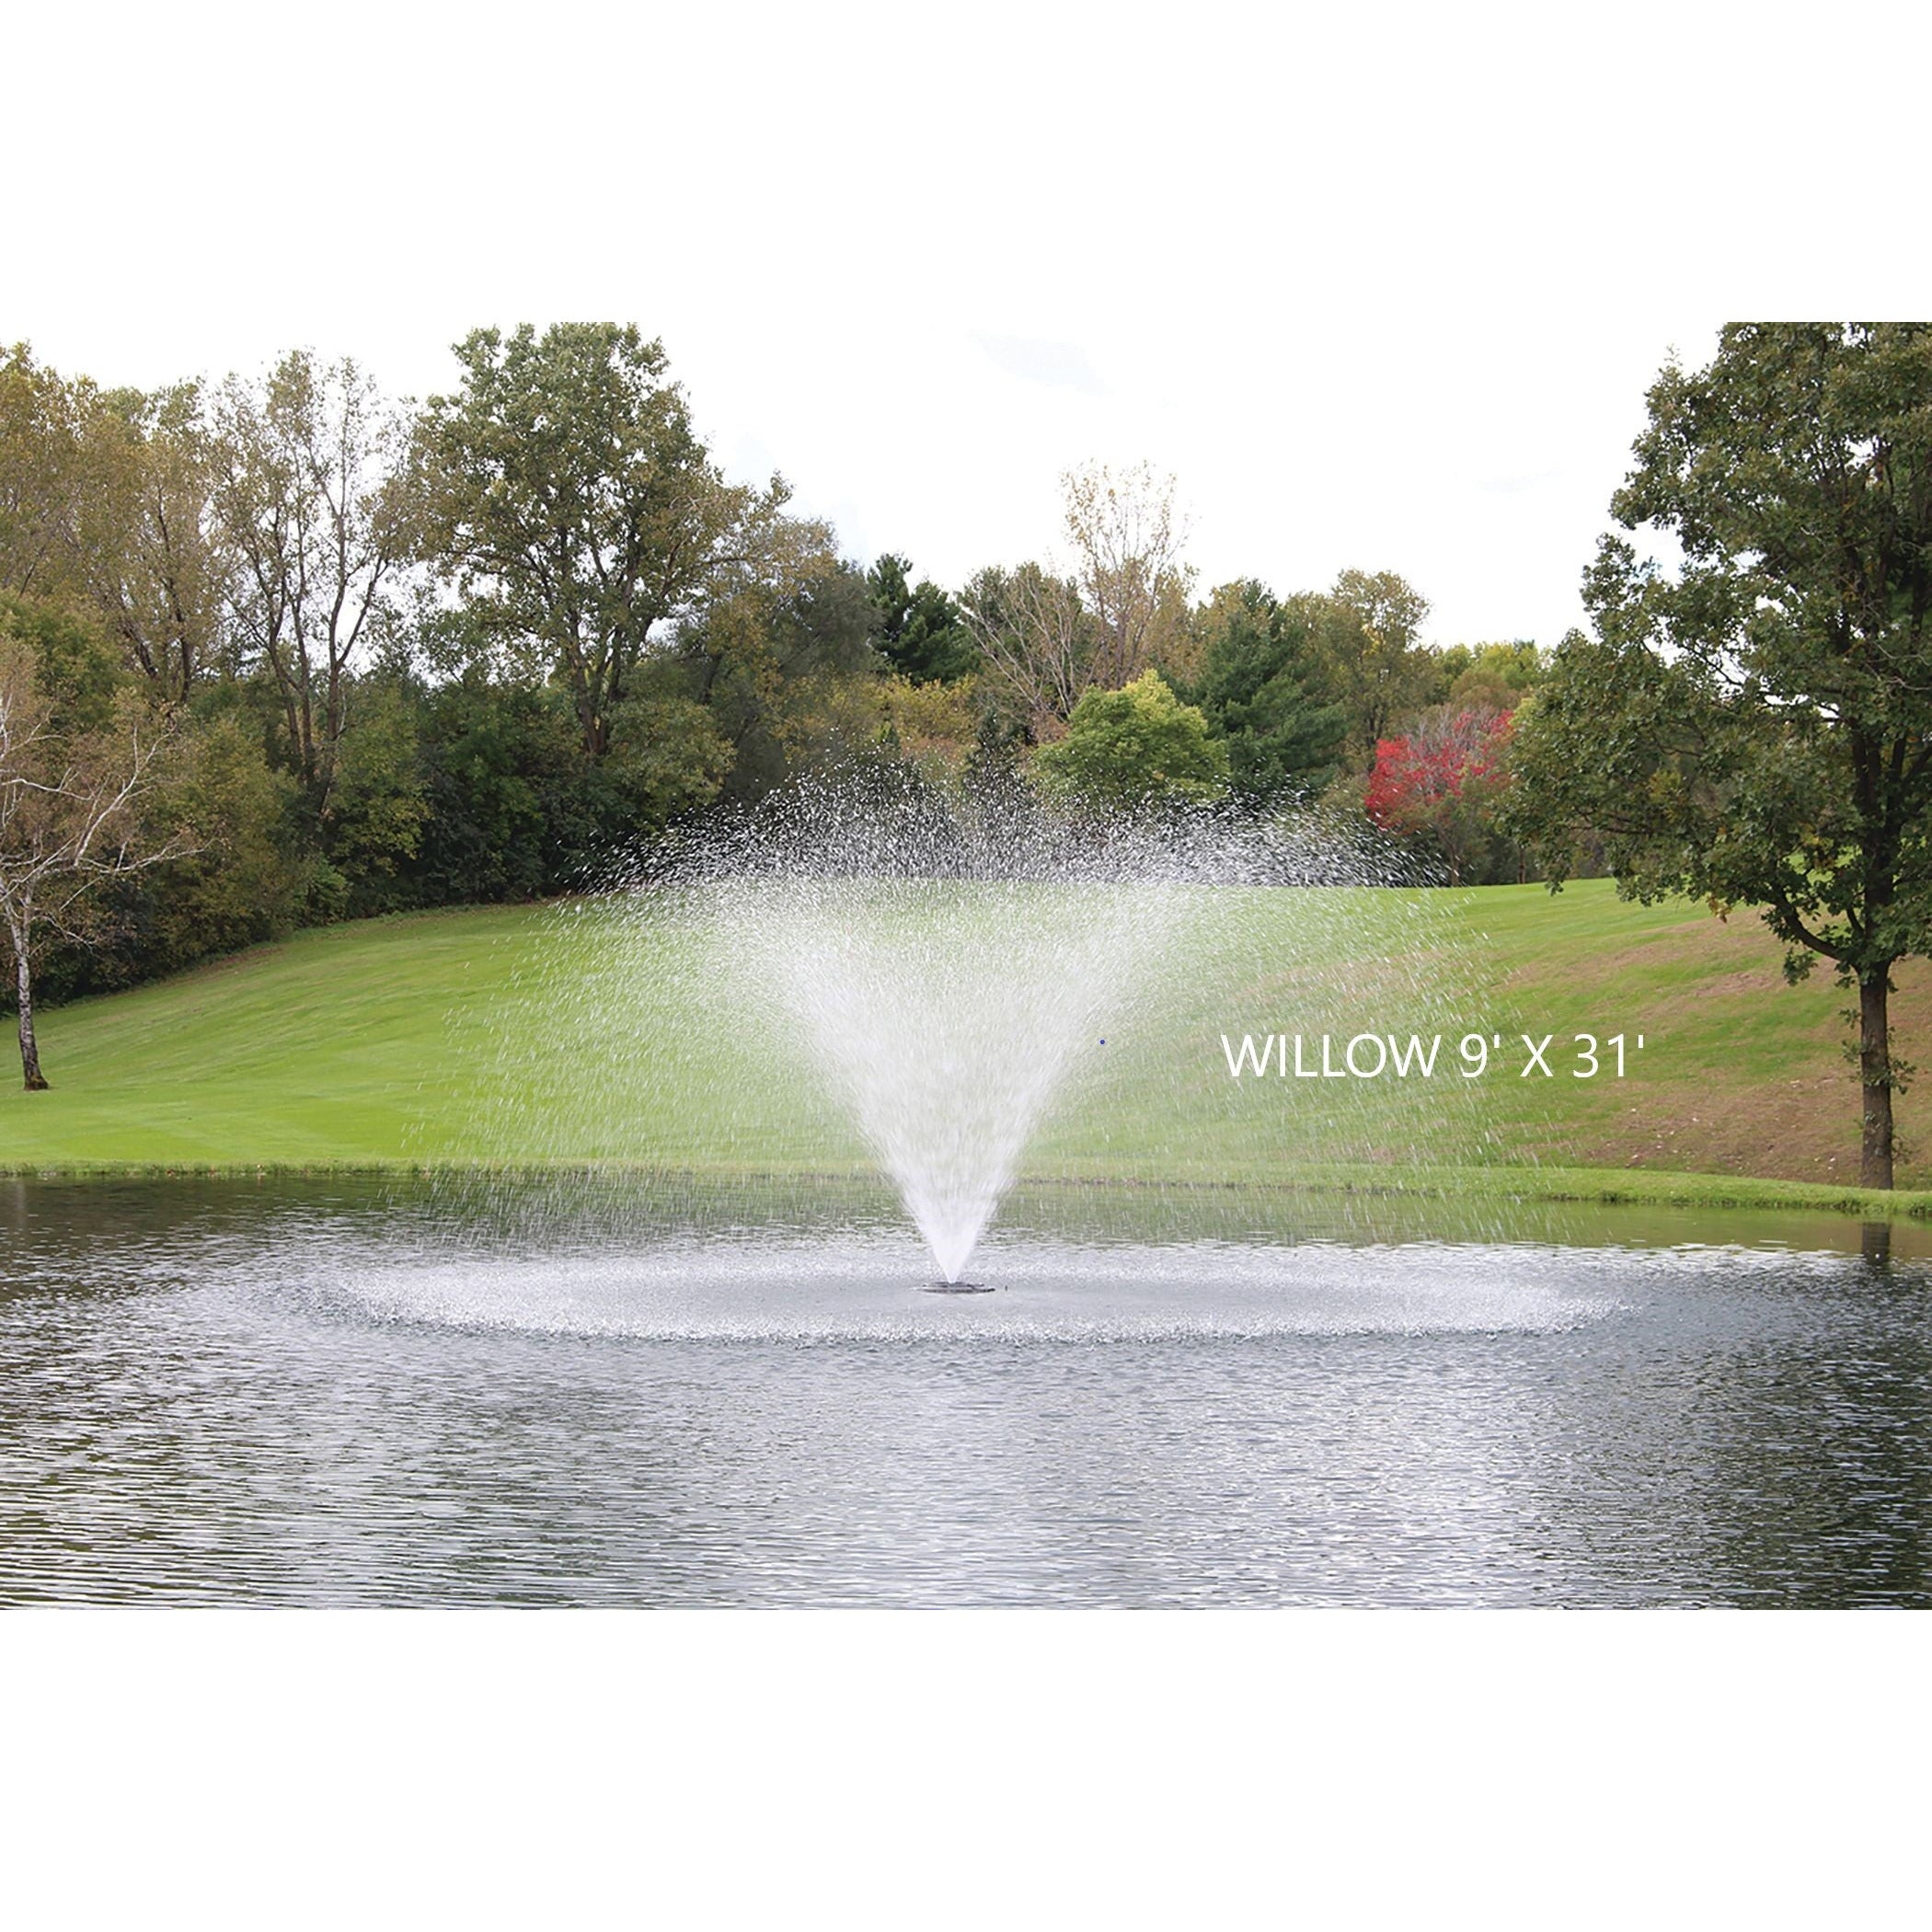 Kasco J Series Pond Fountain 1 HP with Willow spray attachment operating in pond | Your Pond Pros